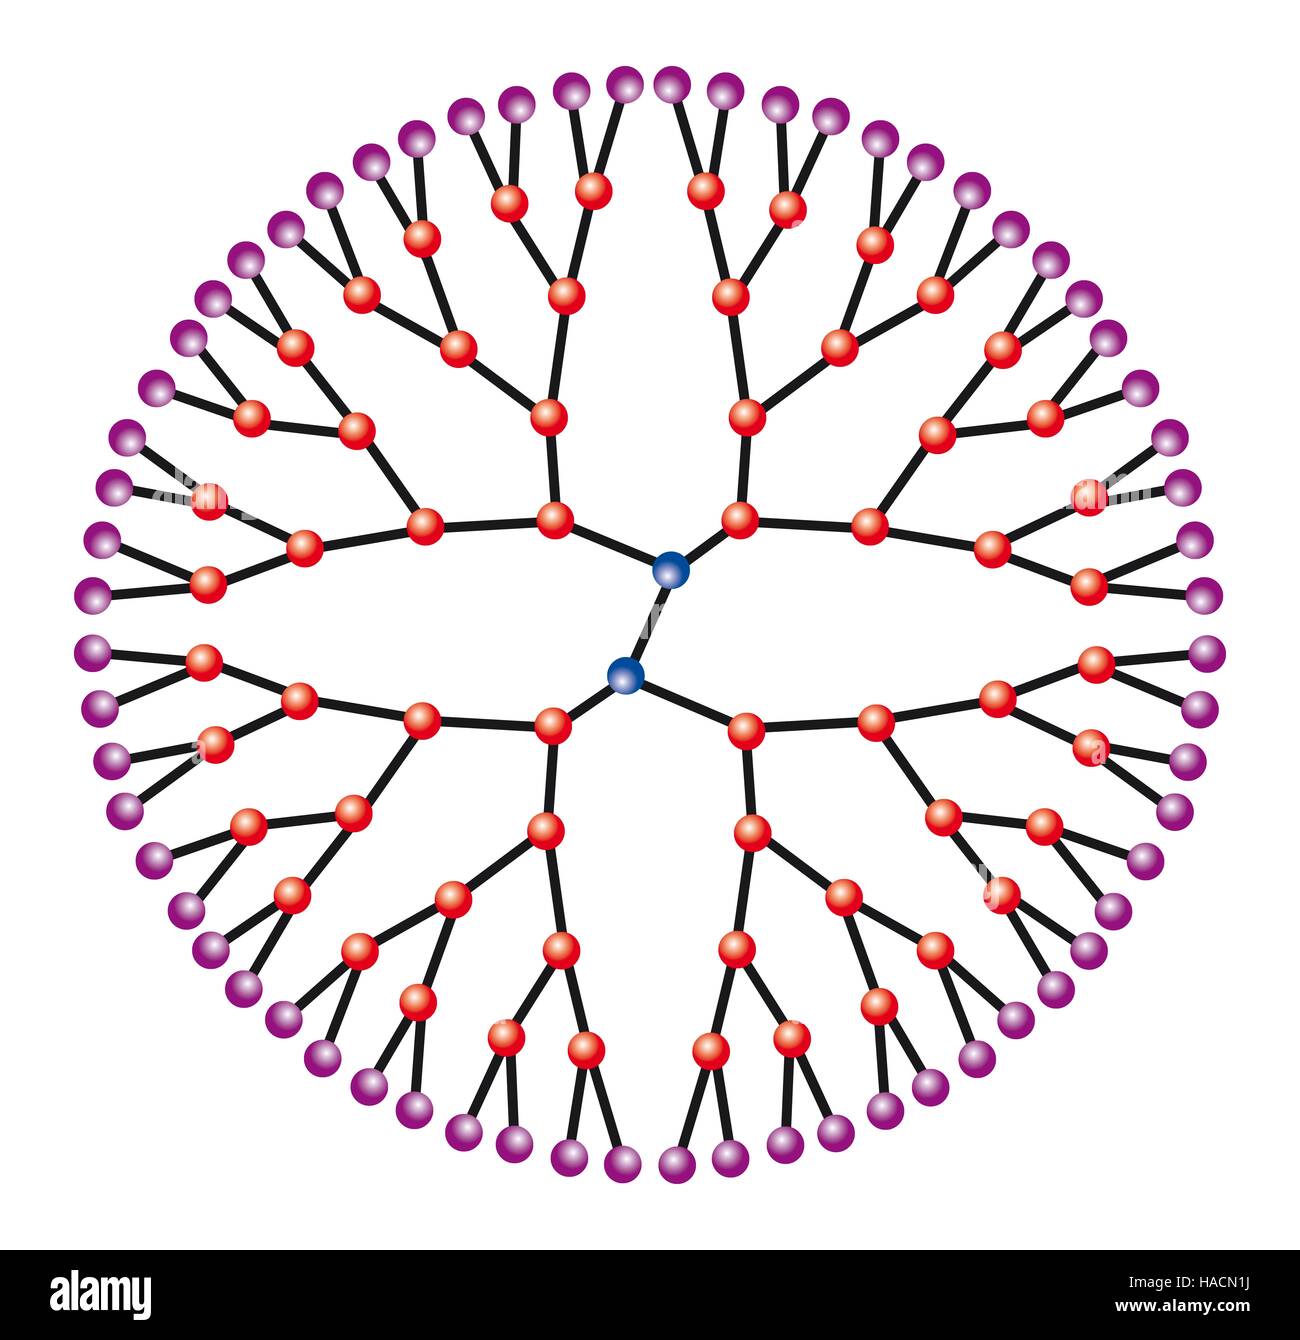 Dendrimer, illustration of the molecular structure. Dendrimers are artificially created branched polymers and subbranches along a central backbone of carbon atoms, usually extending from a central atom or ring of atoms. Also called cascade molecule. Due to the high degree of molecular customisation during synthesis, they may one day be used for a variety of applications, such as nanotechnology, drug delivery systems, nanoscale batteries, lubricants, catalysts and herbicides. Stock Photo